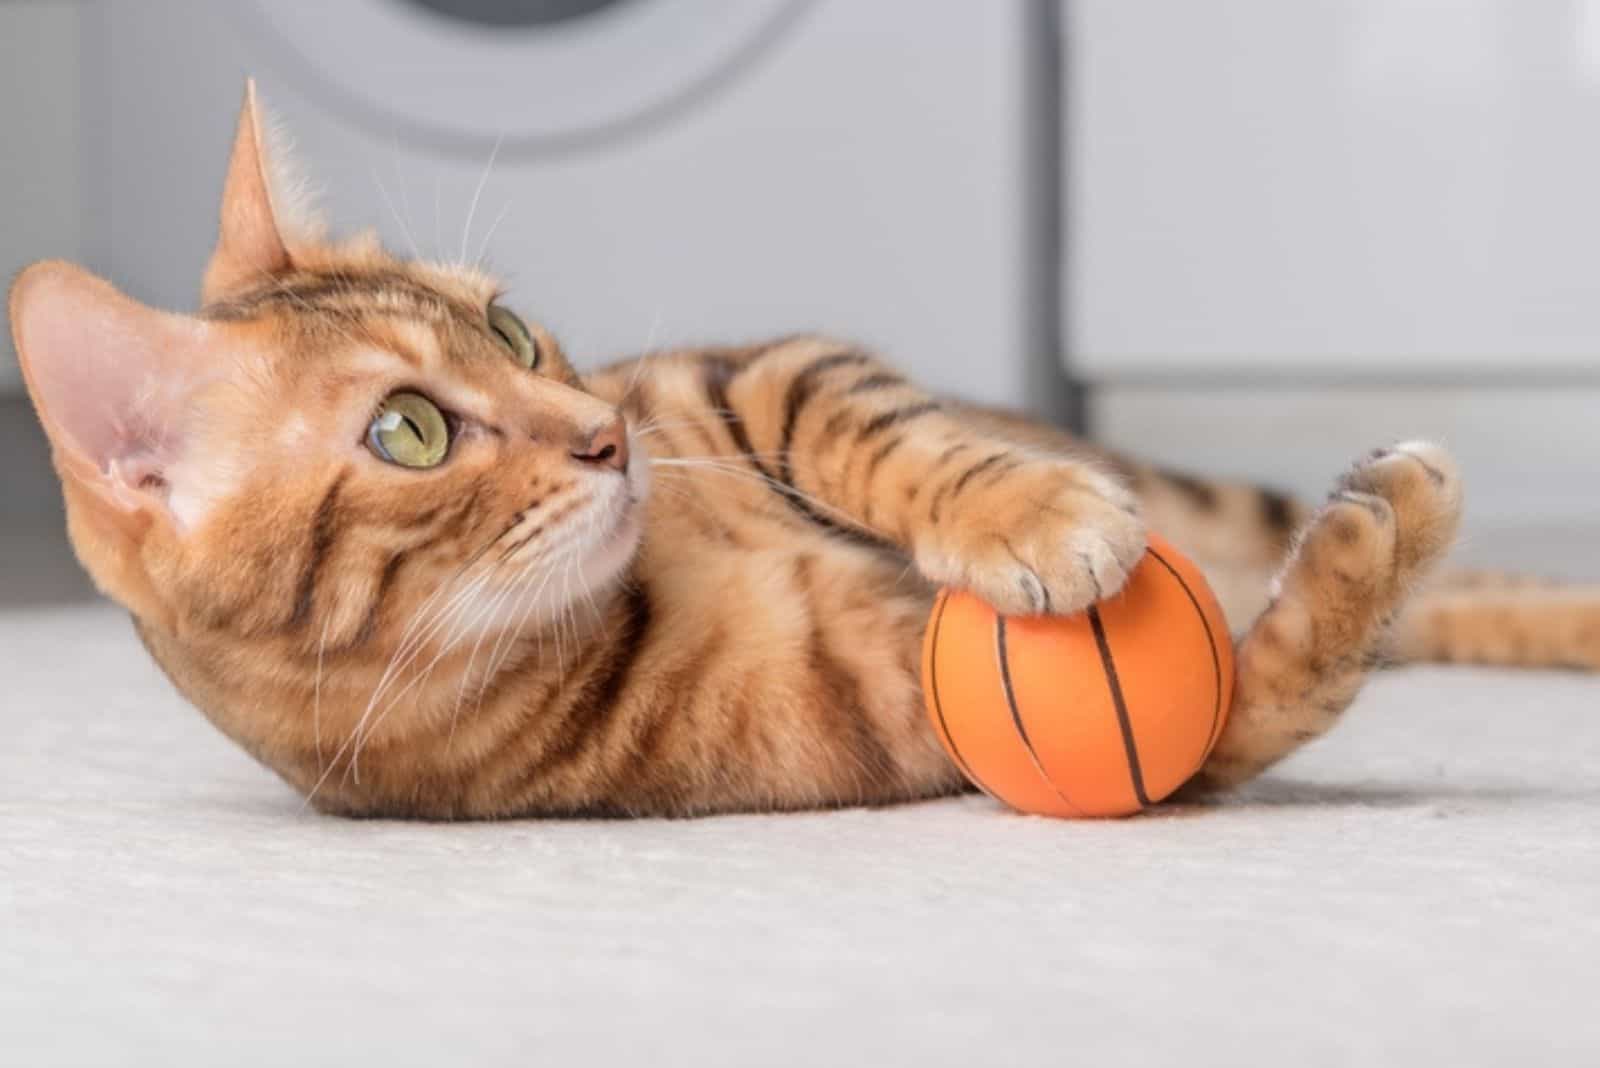 the cat is playing with a ball